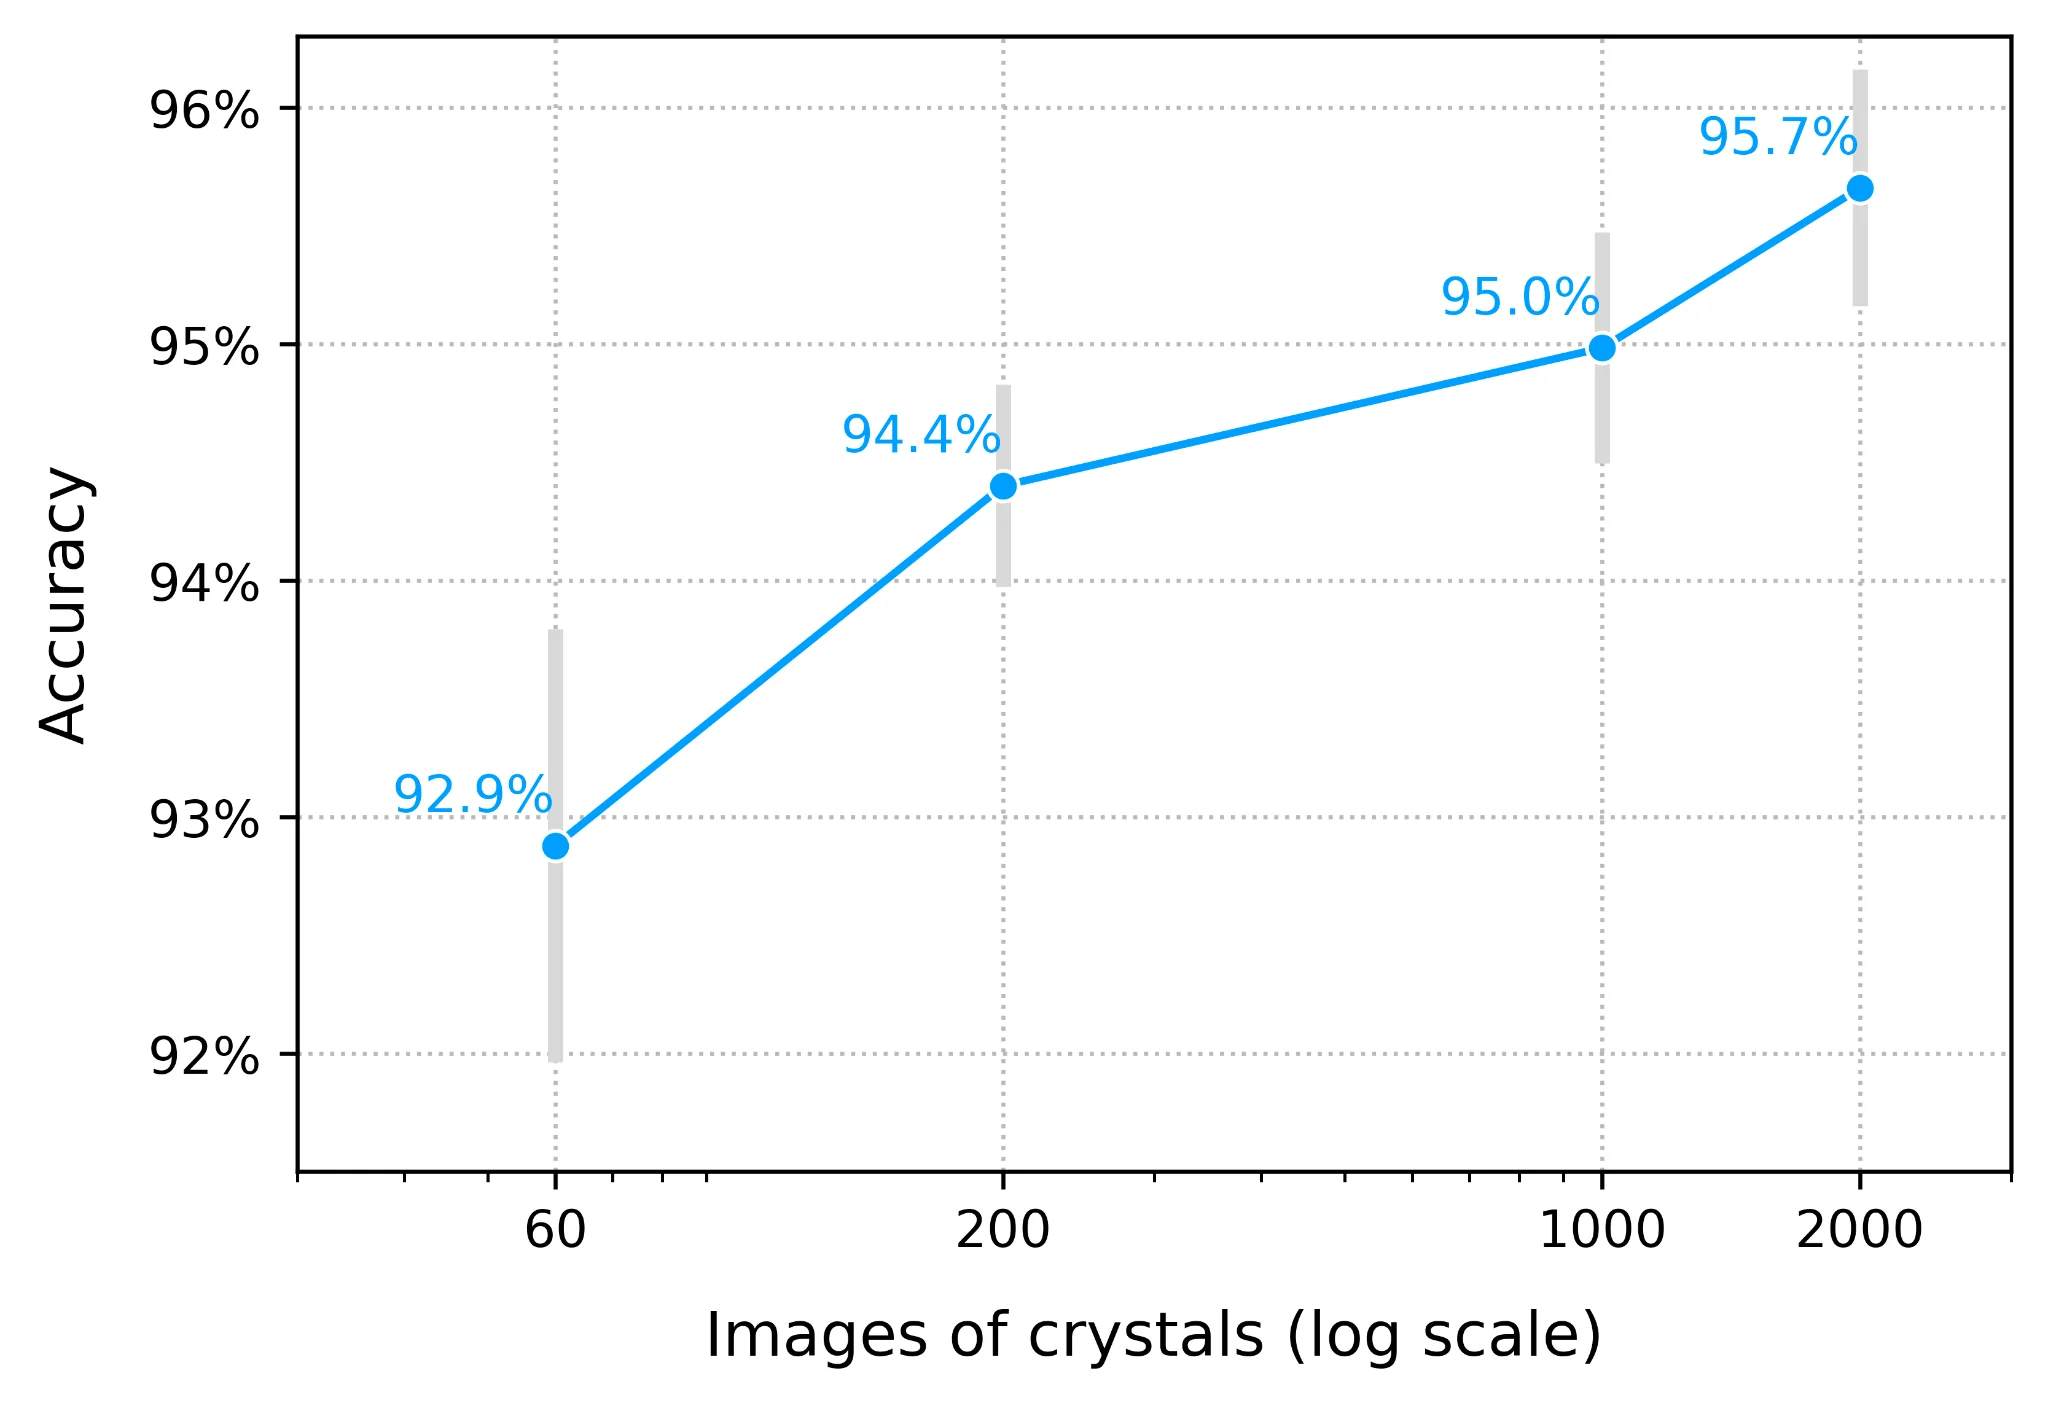 Line chart showing a positive correlation between the size of the training dataset on a logarithmic scale and the accuracy of a crystal detection algorithm. Starting with 92.9% accuracy for 60 images, the chart shows a gradual increase to 95.7% accuracy for 2000 images, with intermediate values of 94.4% for 200 images and 95.0% for 1000 images.